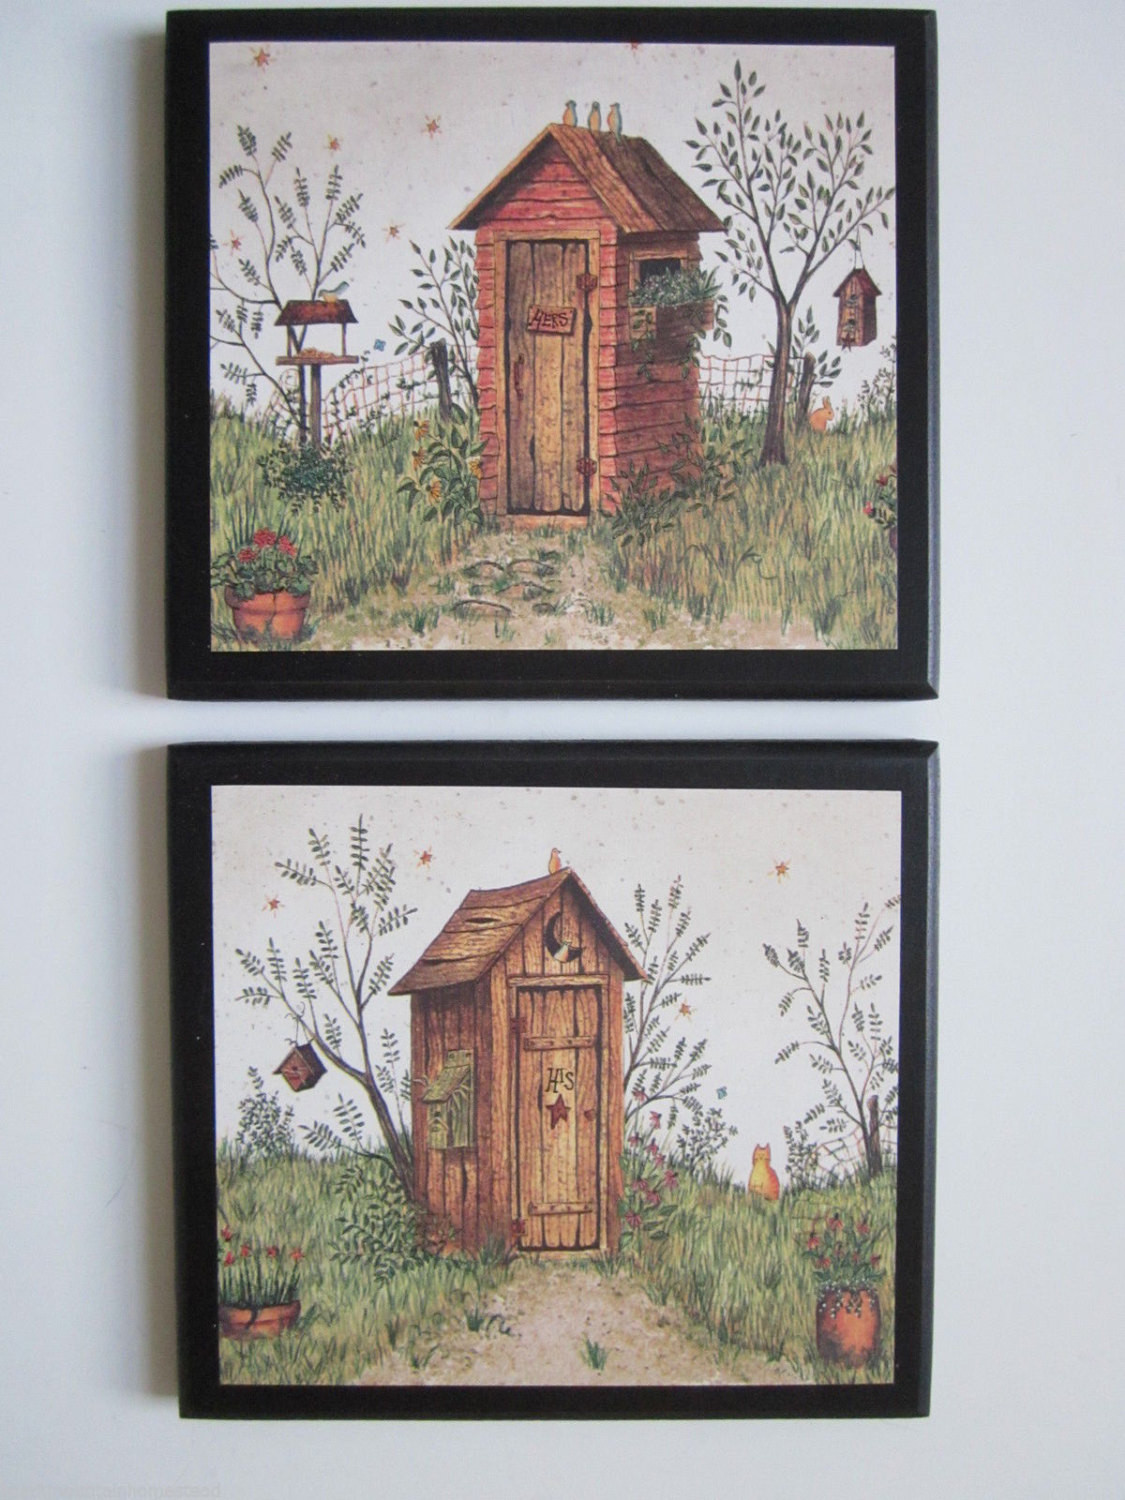 Country Bathroom Wall Decor
 Outhouses for country bath His & Hers Rustic Lodge Wall